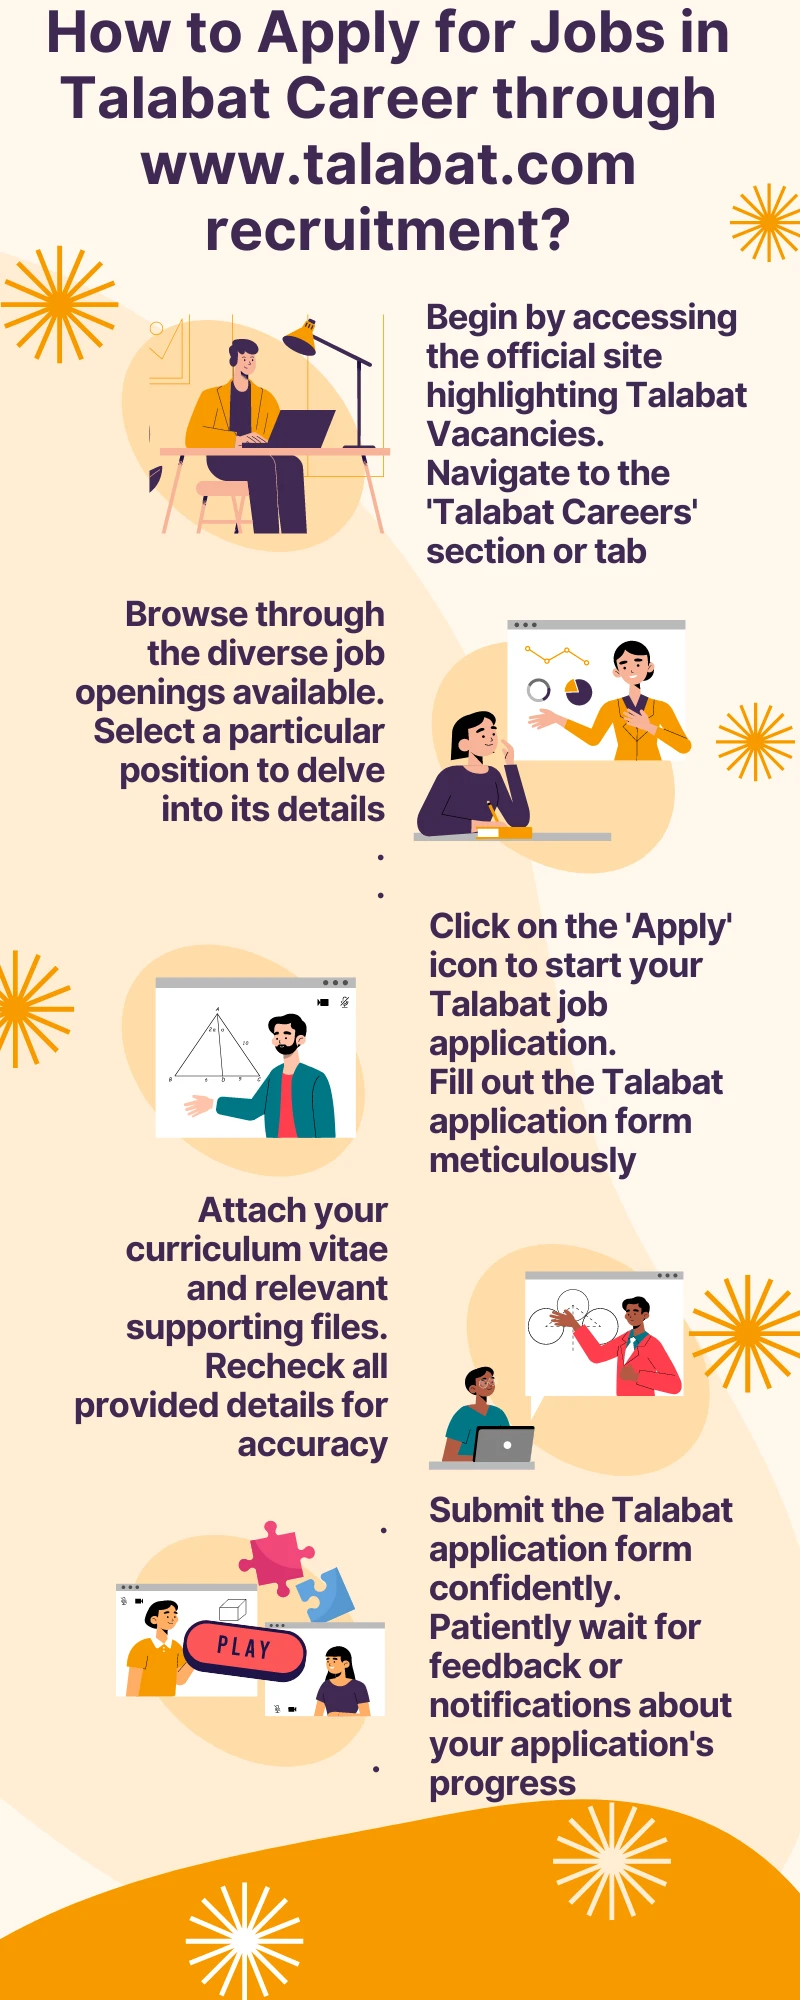 How to Apply for Jobs in Talabat Career through www.talabat.com recruitment?